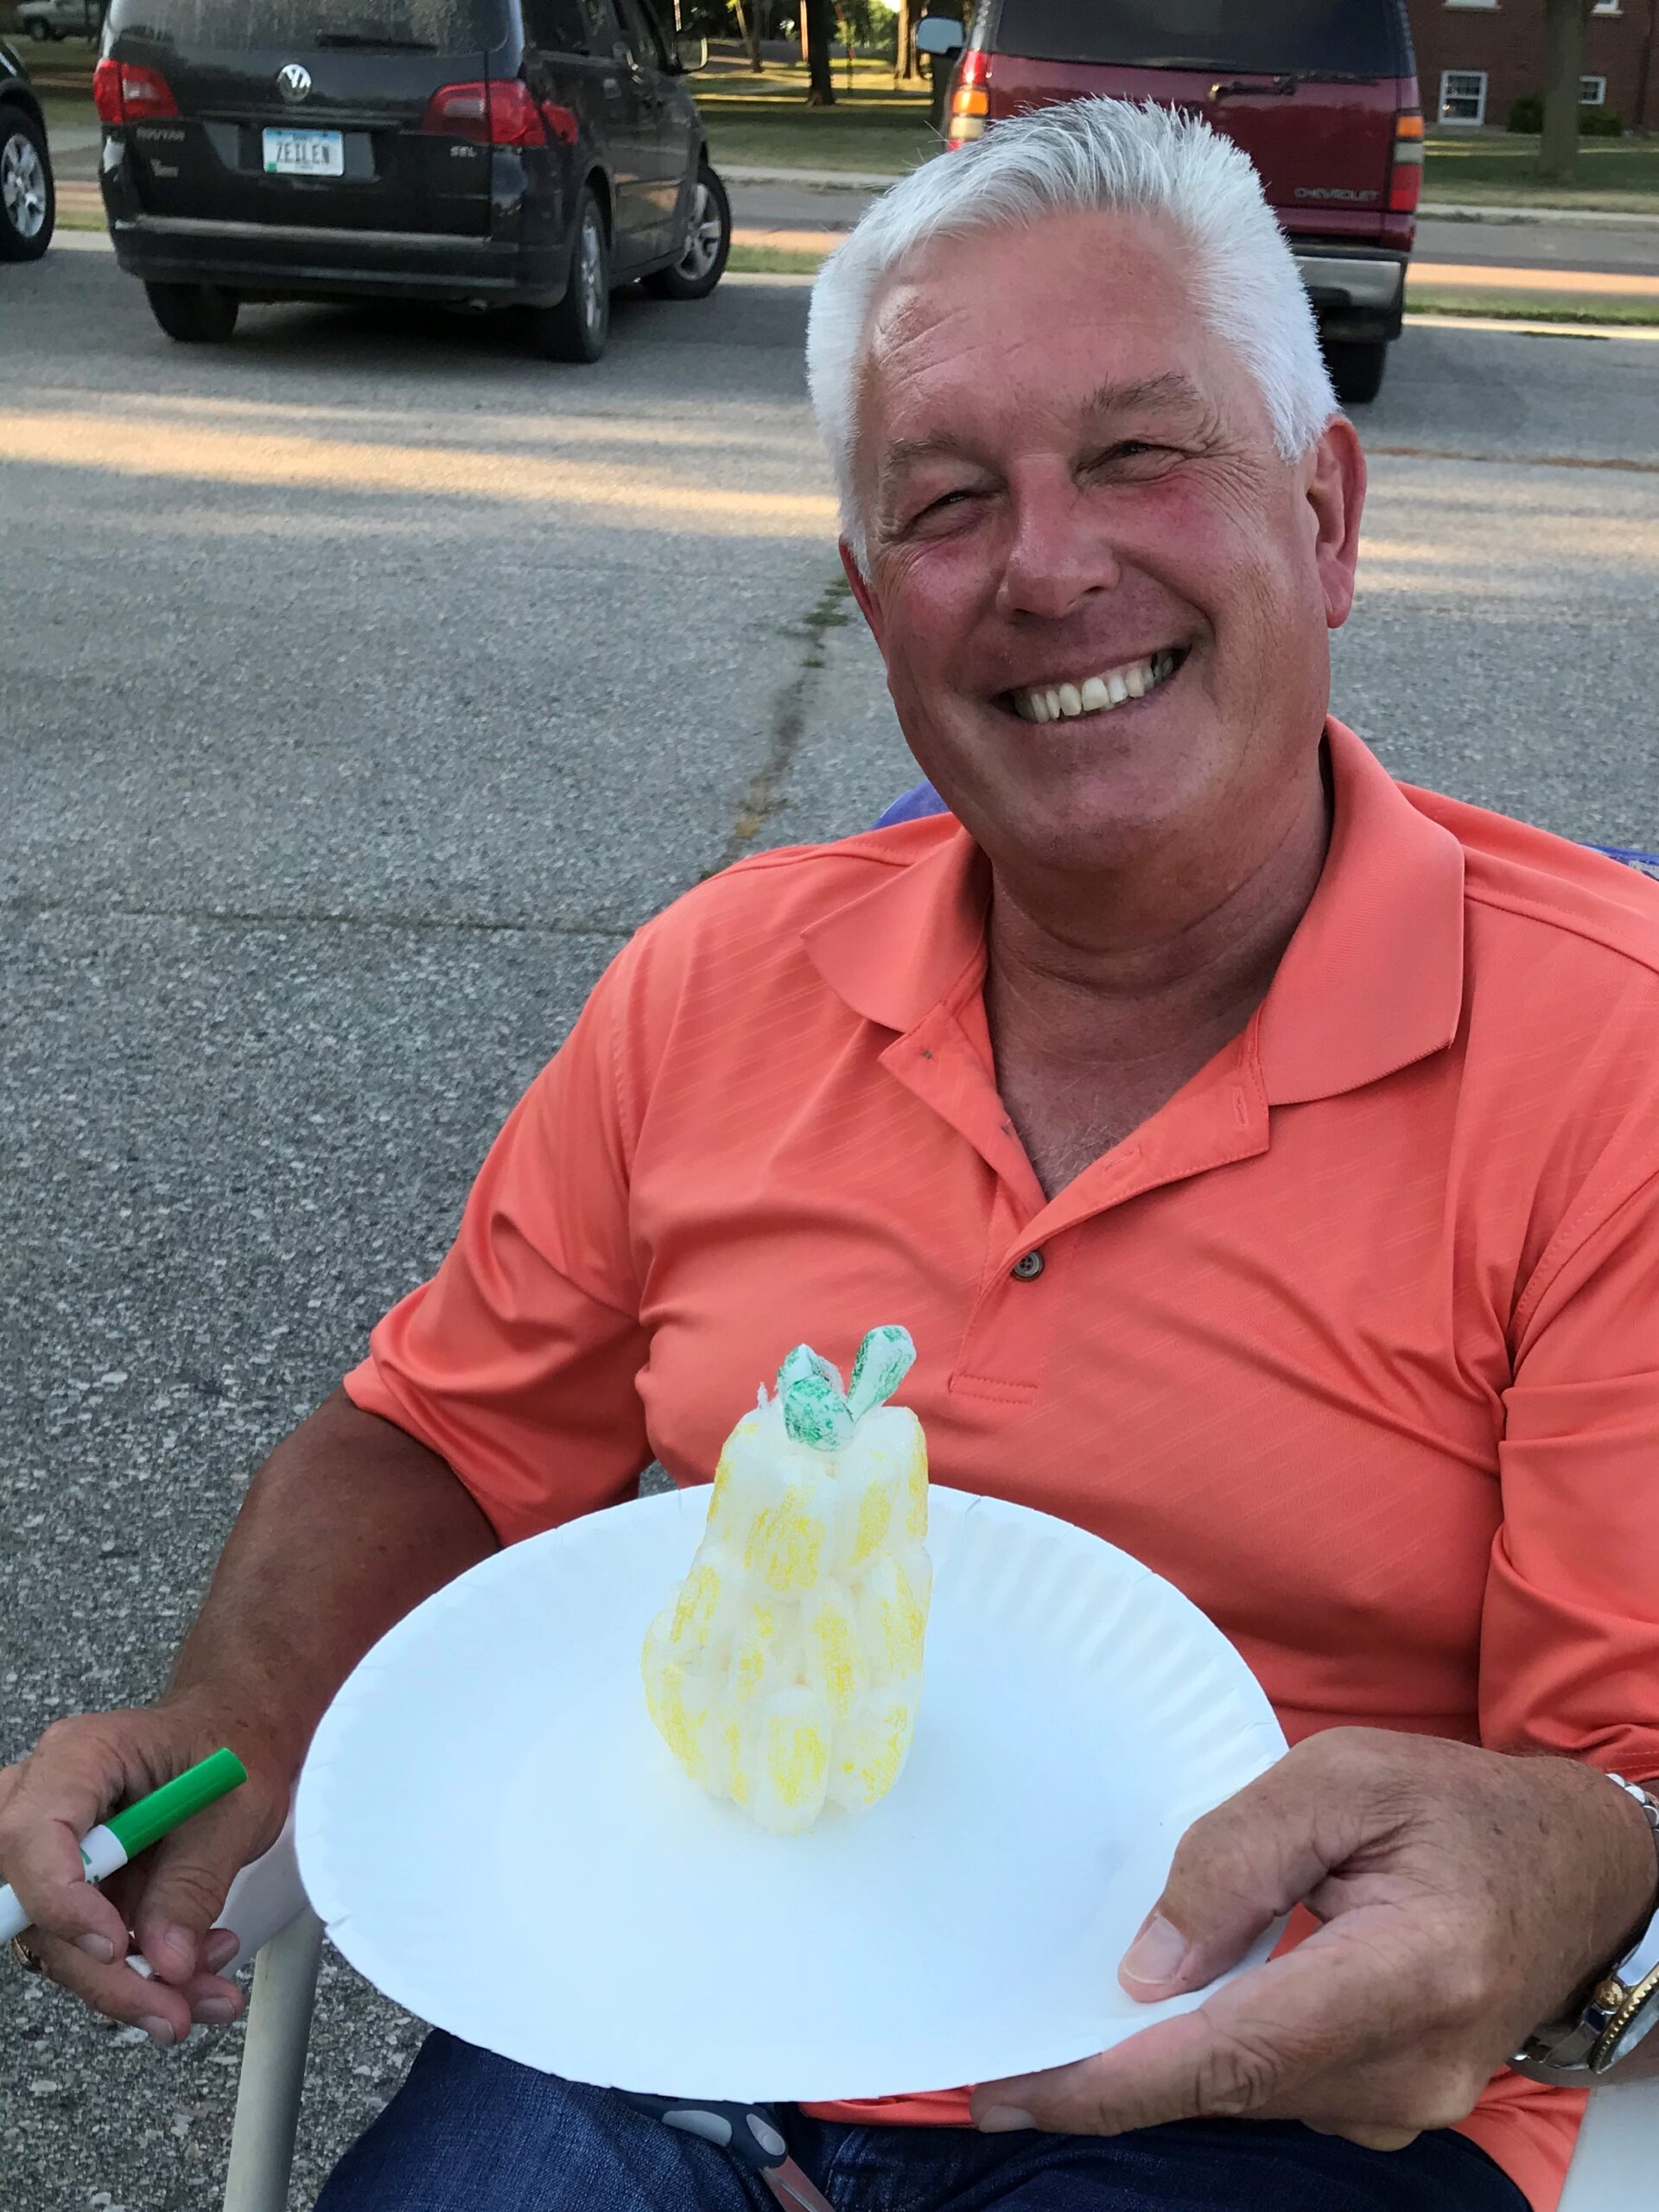 Pastor Dave made a pineapple.